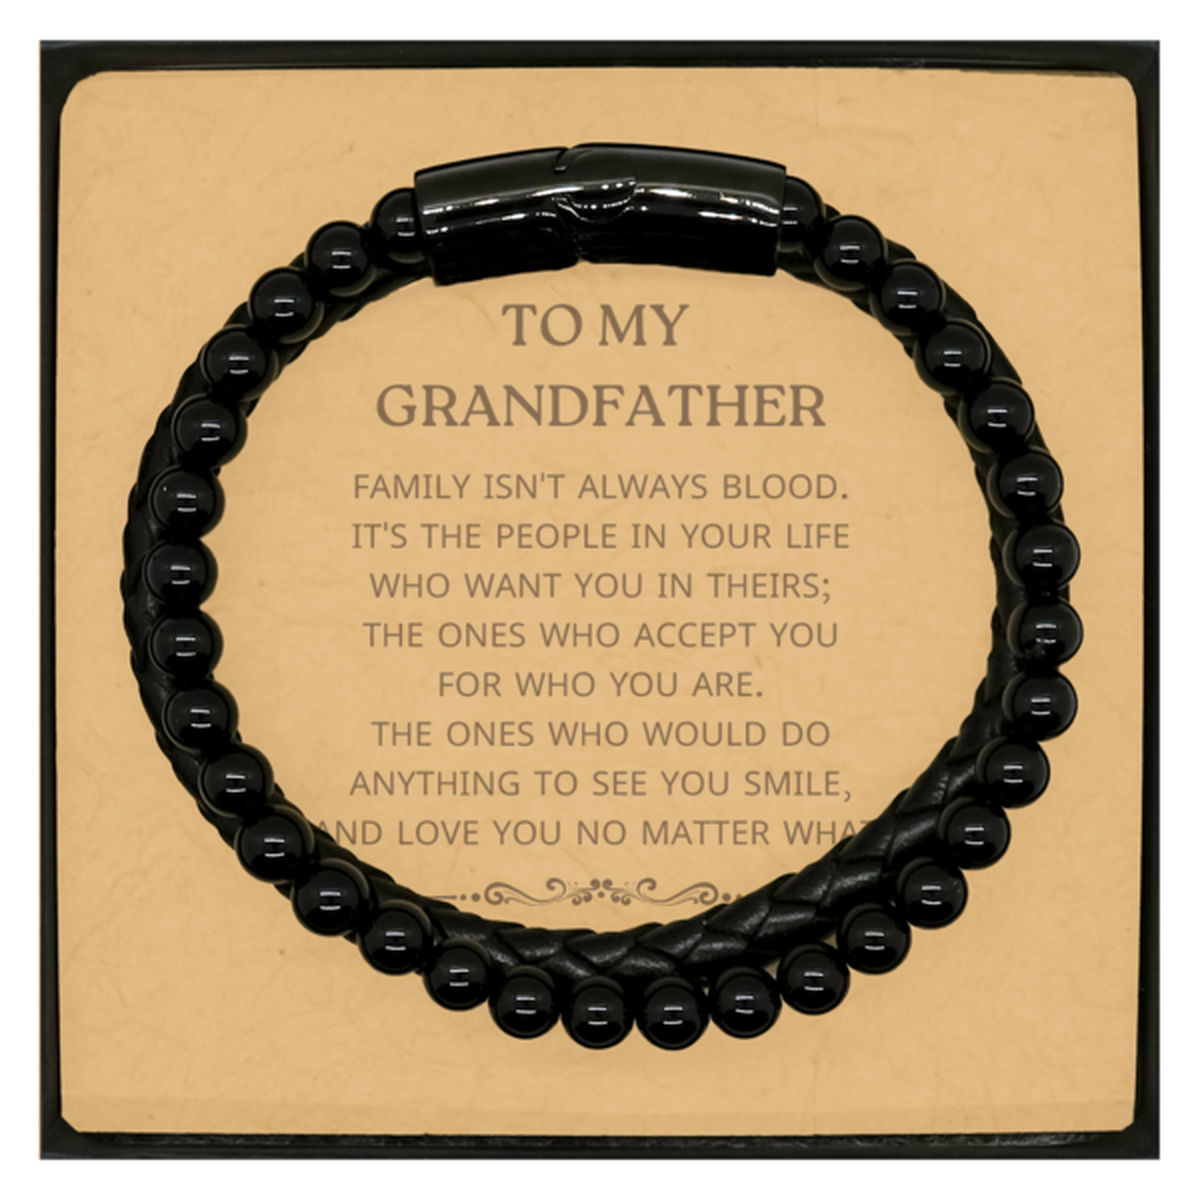 To My Grandfather Gifts, Family isn't always blood, Grandfather Stone Leather Bracelets, Birthday Christmas Unique Present For Grandfather